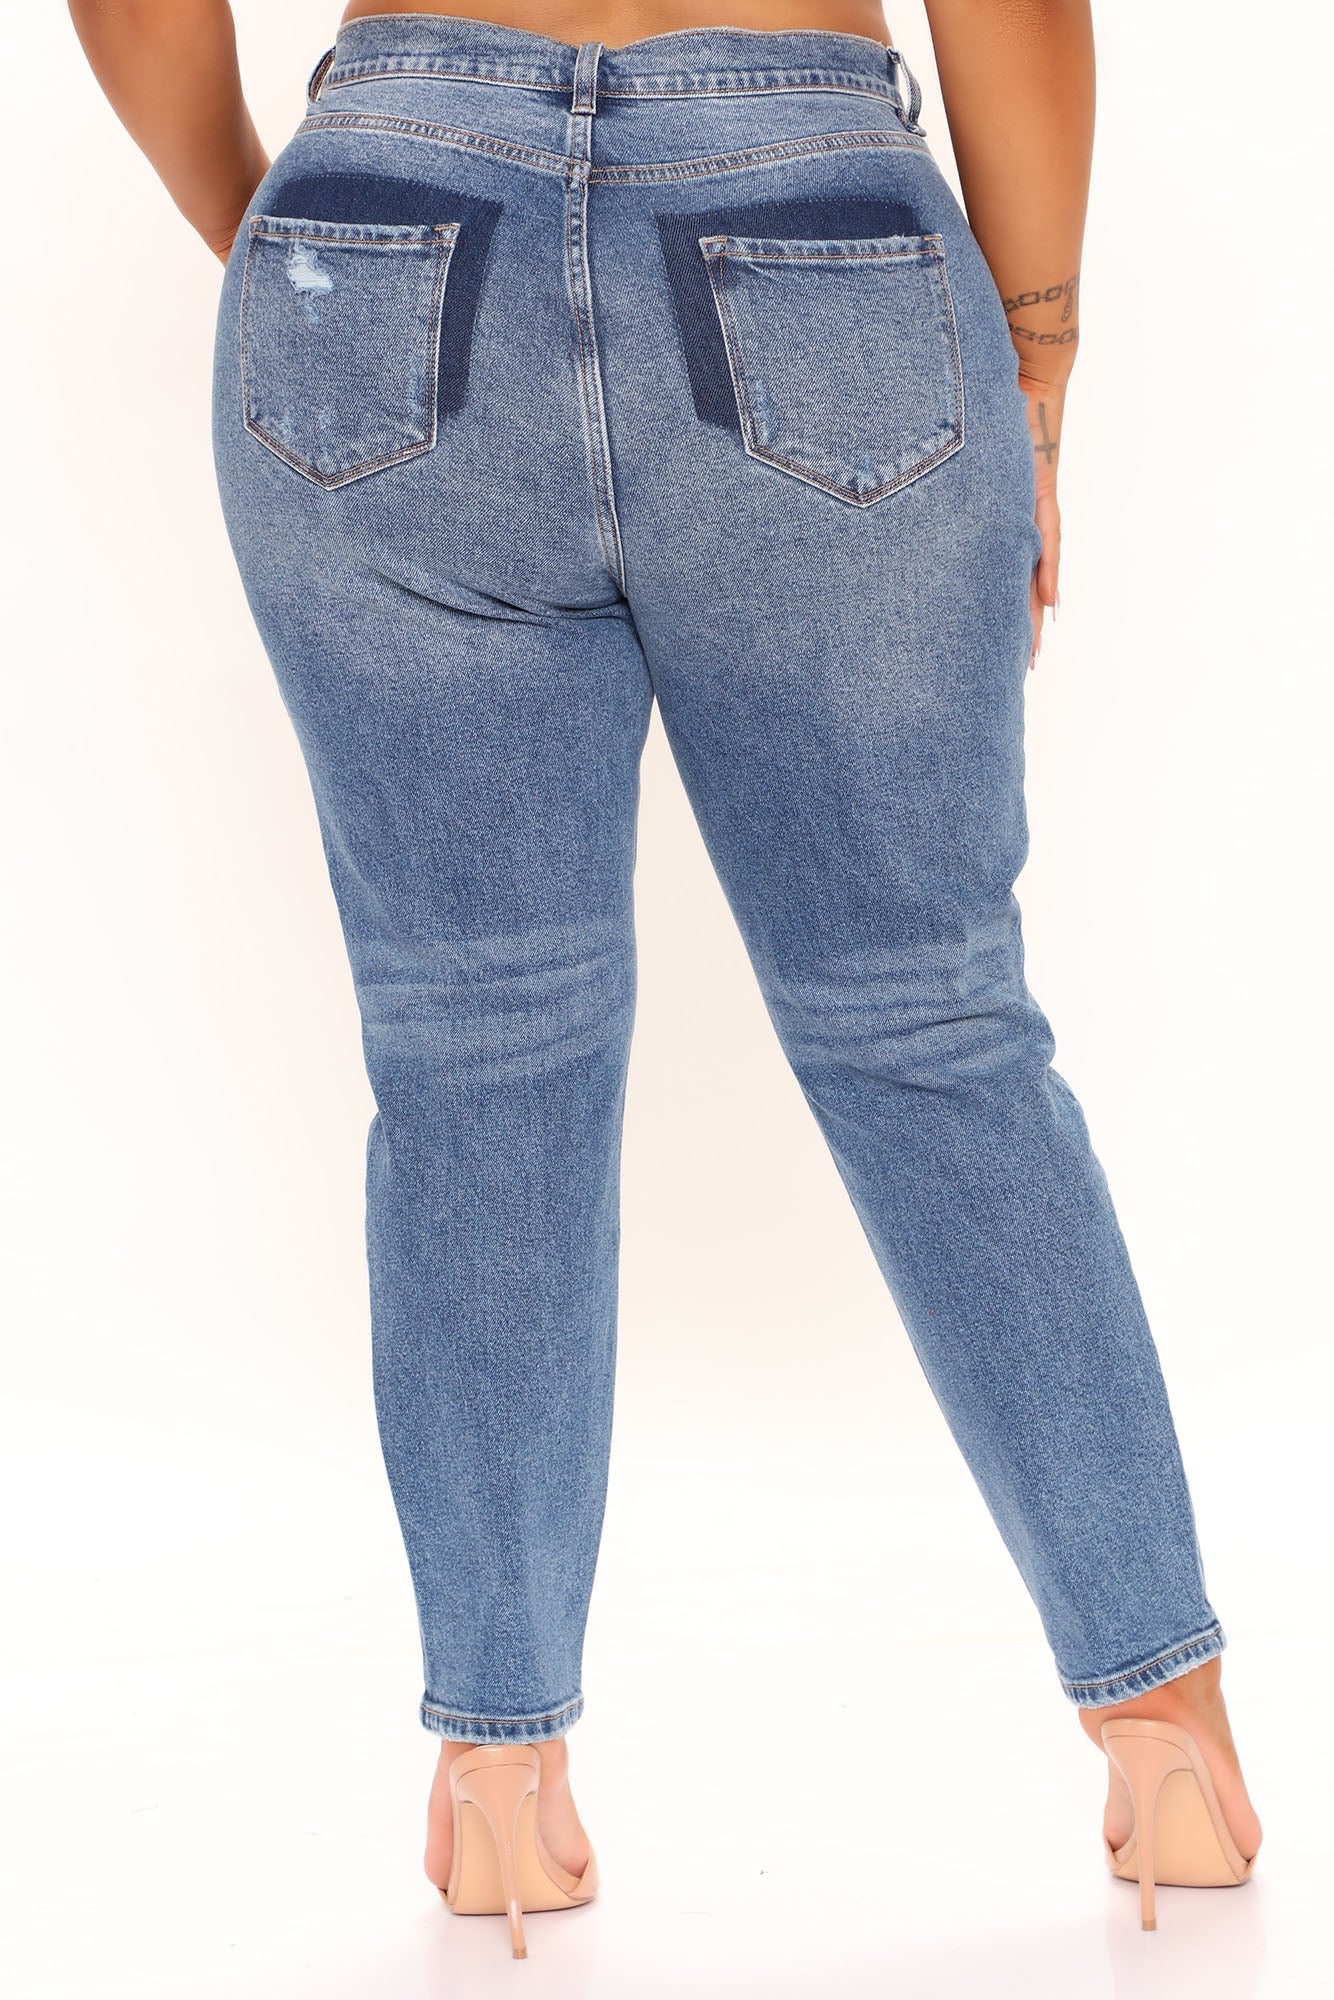 I Got It From My Stepmom High Rise Jeans - Medium Blue Wash – VP Clothes